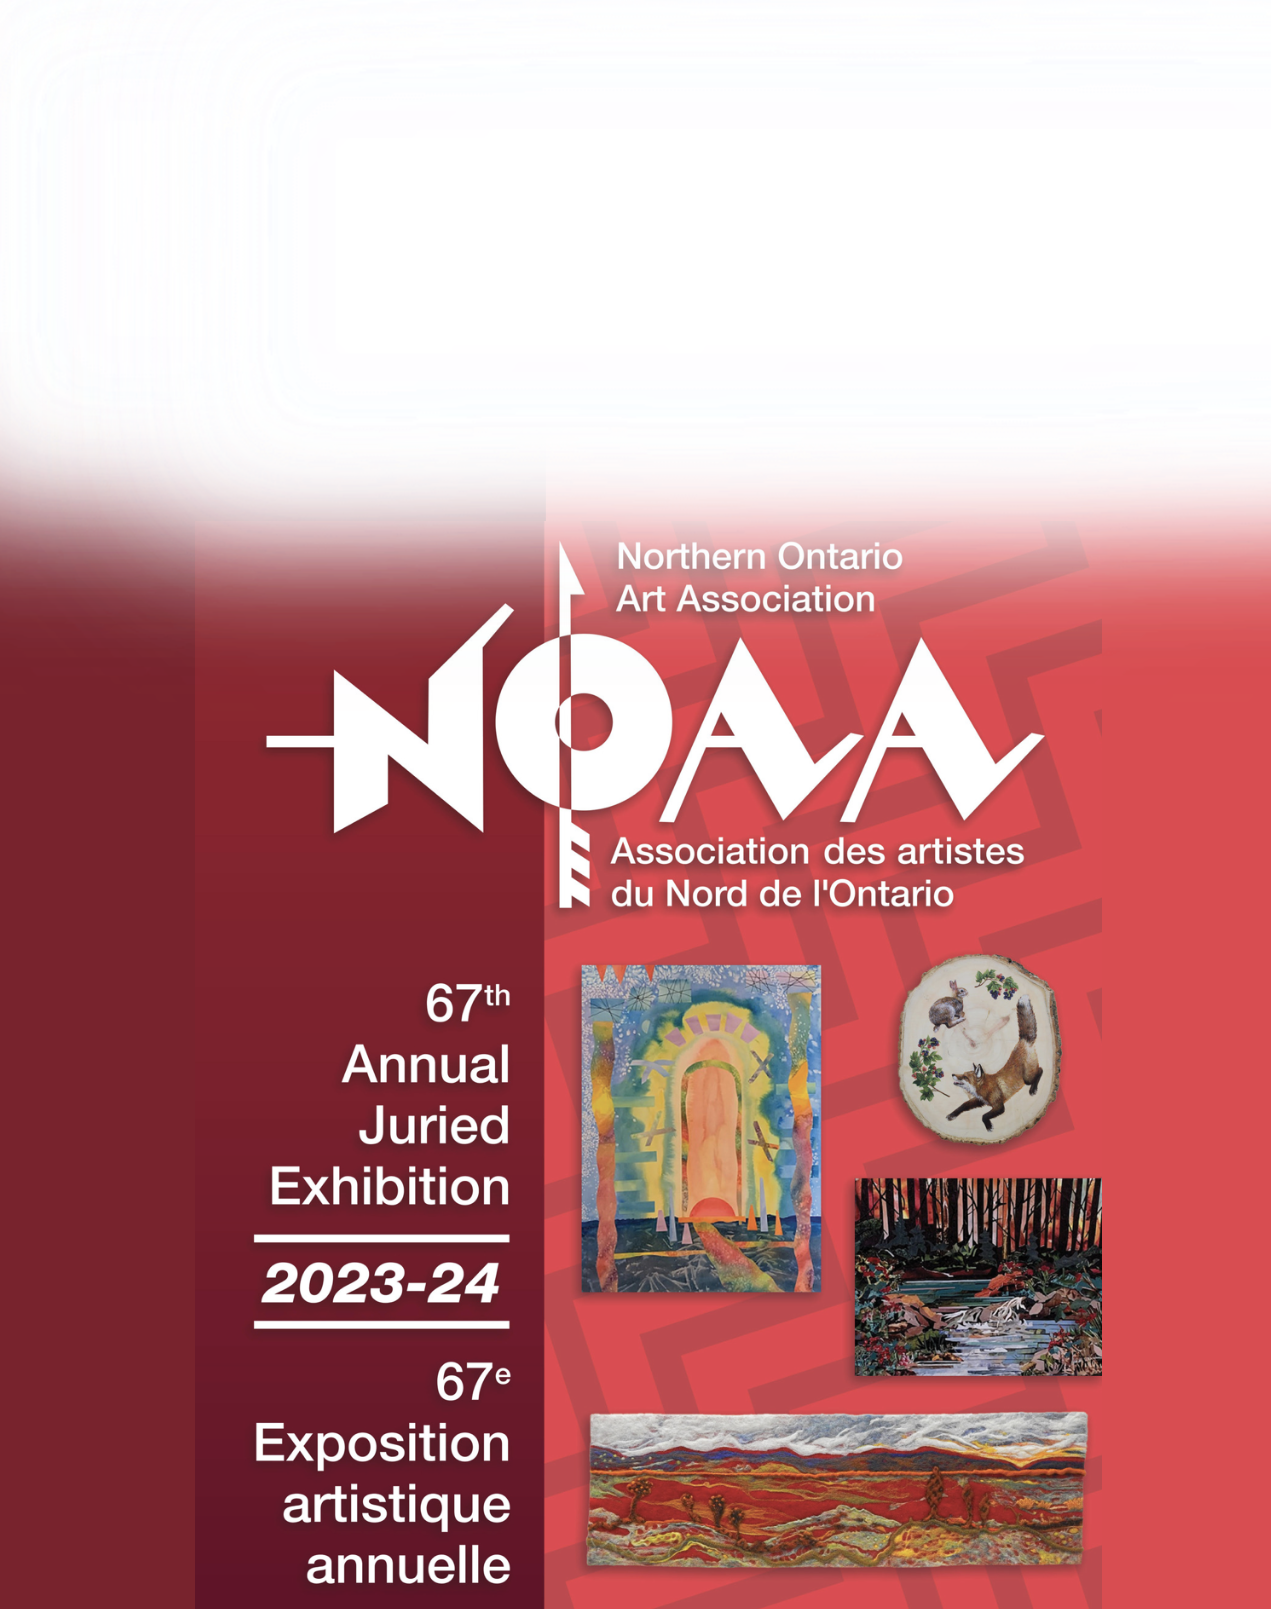 Opening Reception: 67th NOAA Juried Exhibition